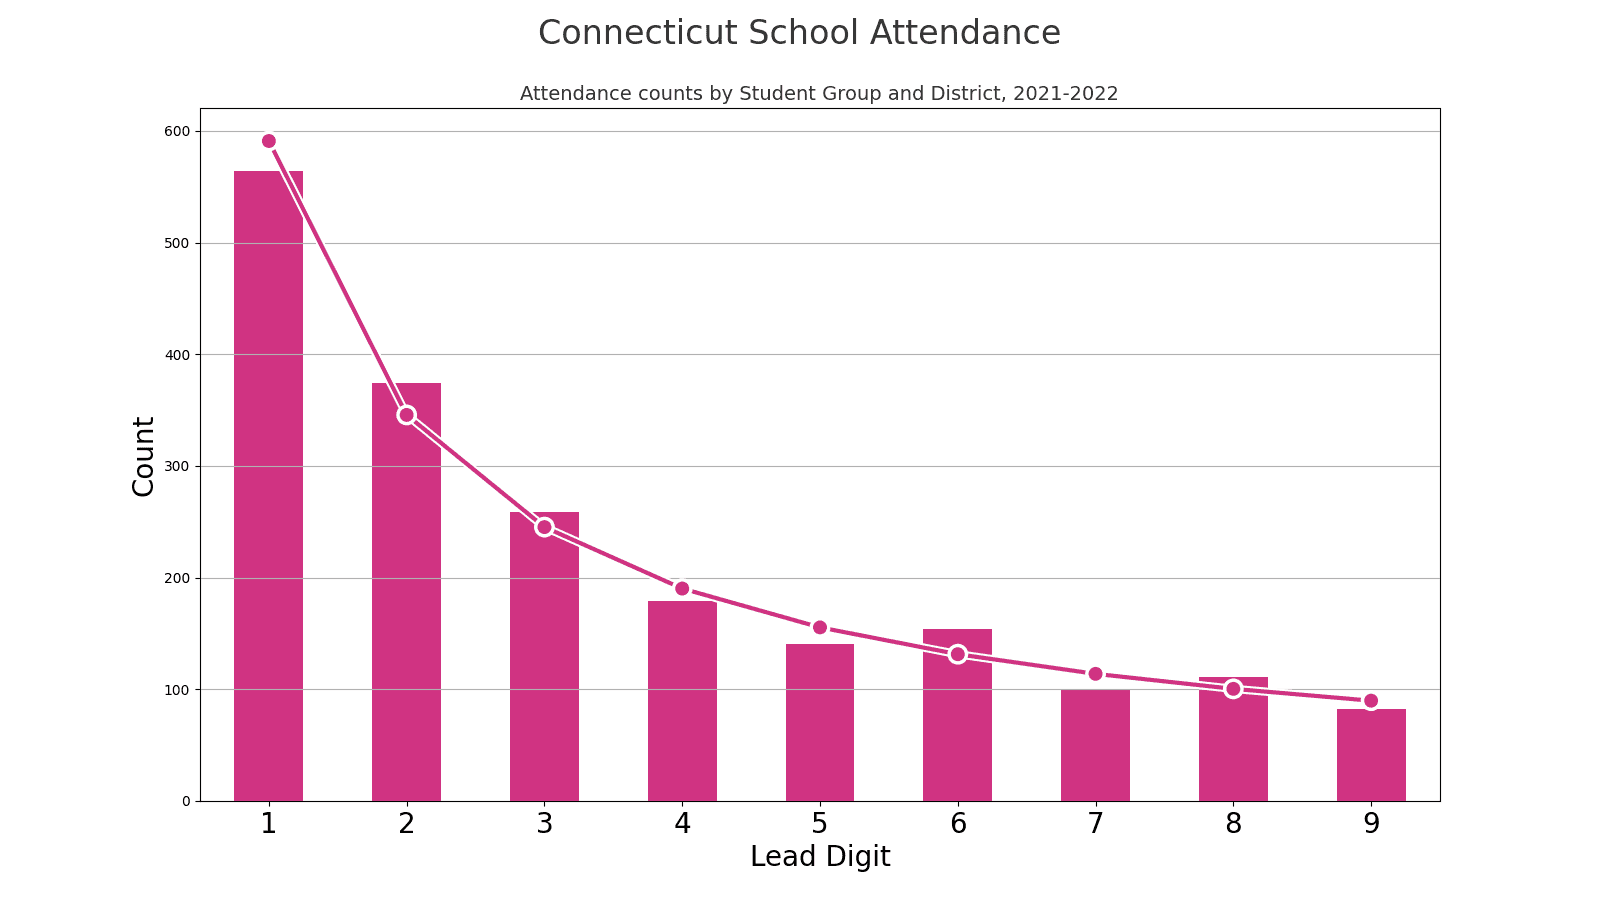 The distribution of lead digits from school attendance counts.